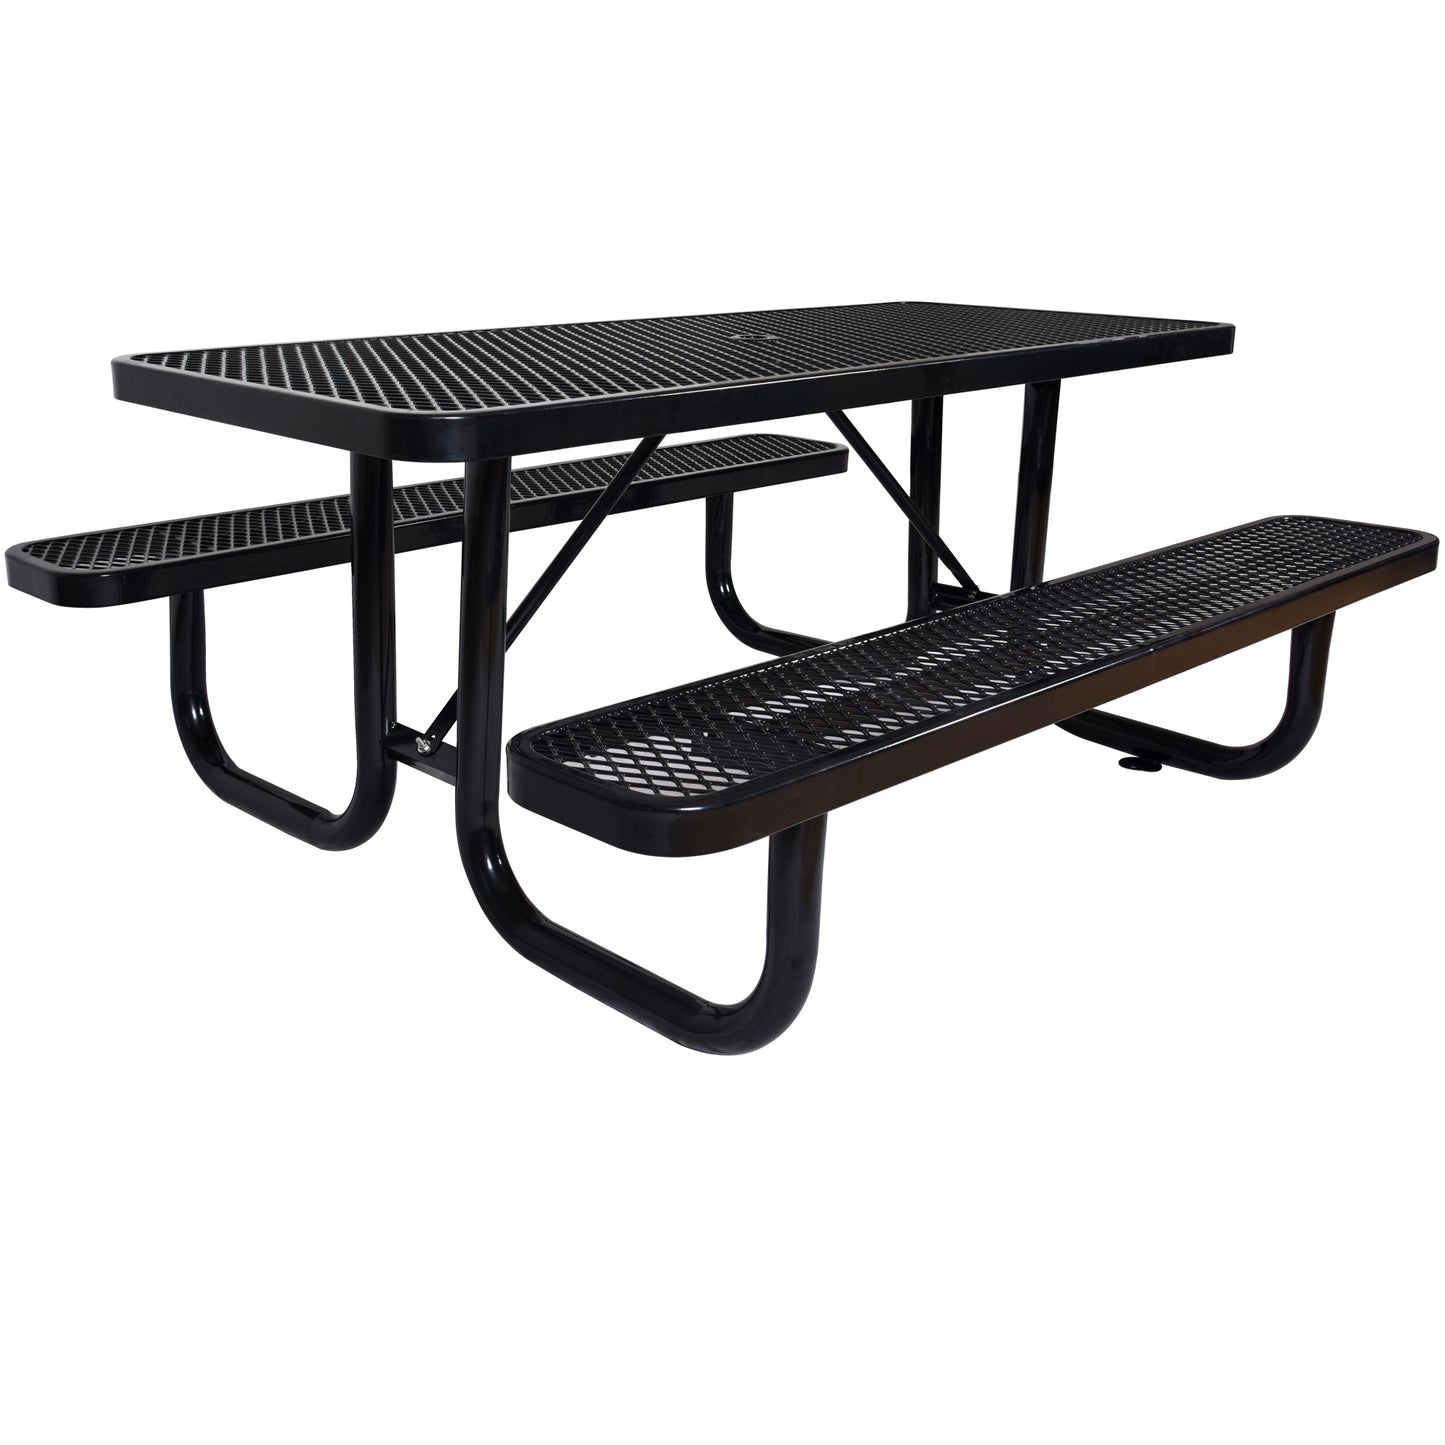 6 ft. Rectangular Outdoor Steel Picnic Table ,BLACK with umbrella pole